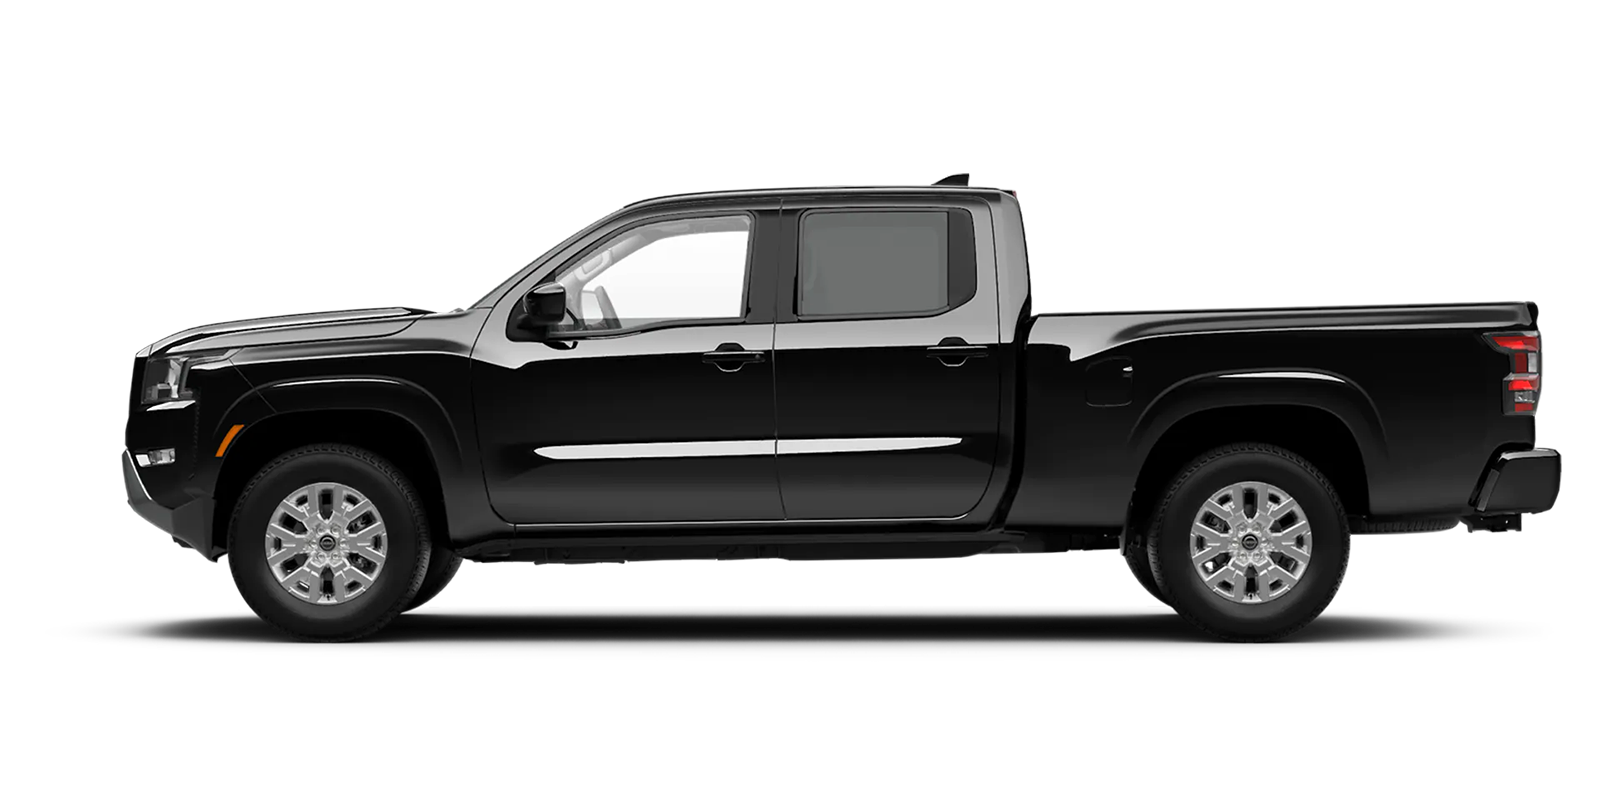 2022 Frontier Crew Cab Long Bed SV 4x2 in Super Black | Performance Nissan of Pompano in Pompano Beach FL